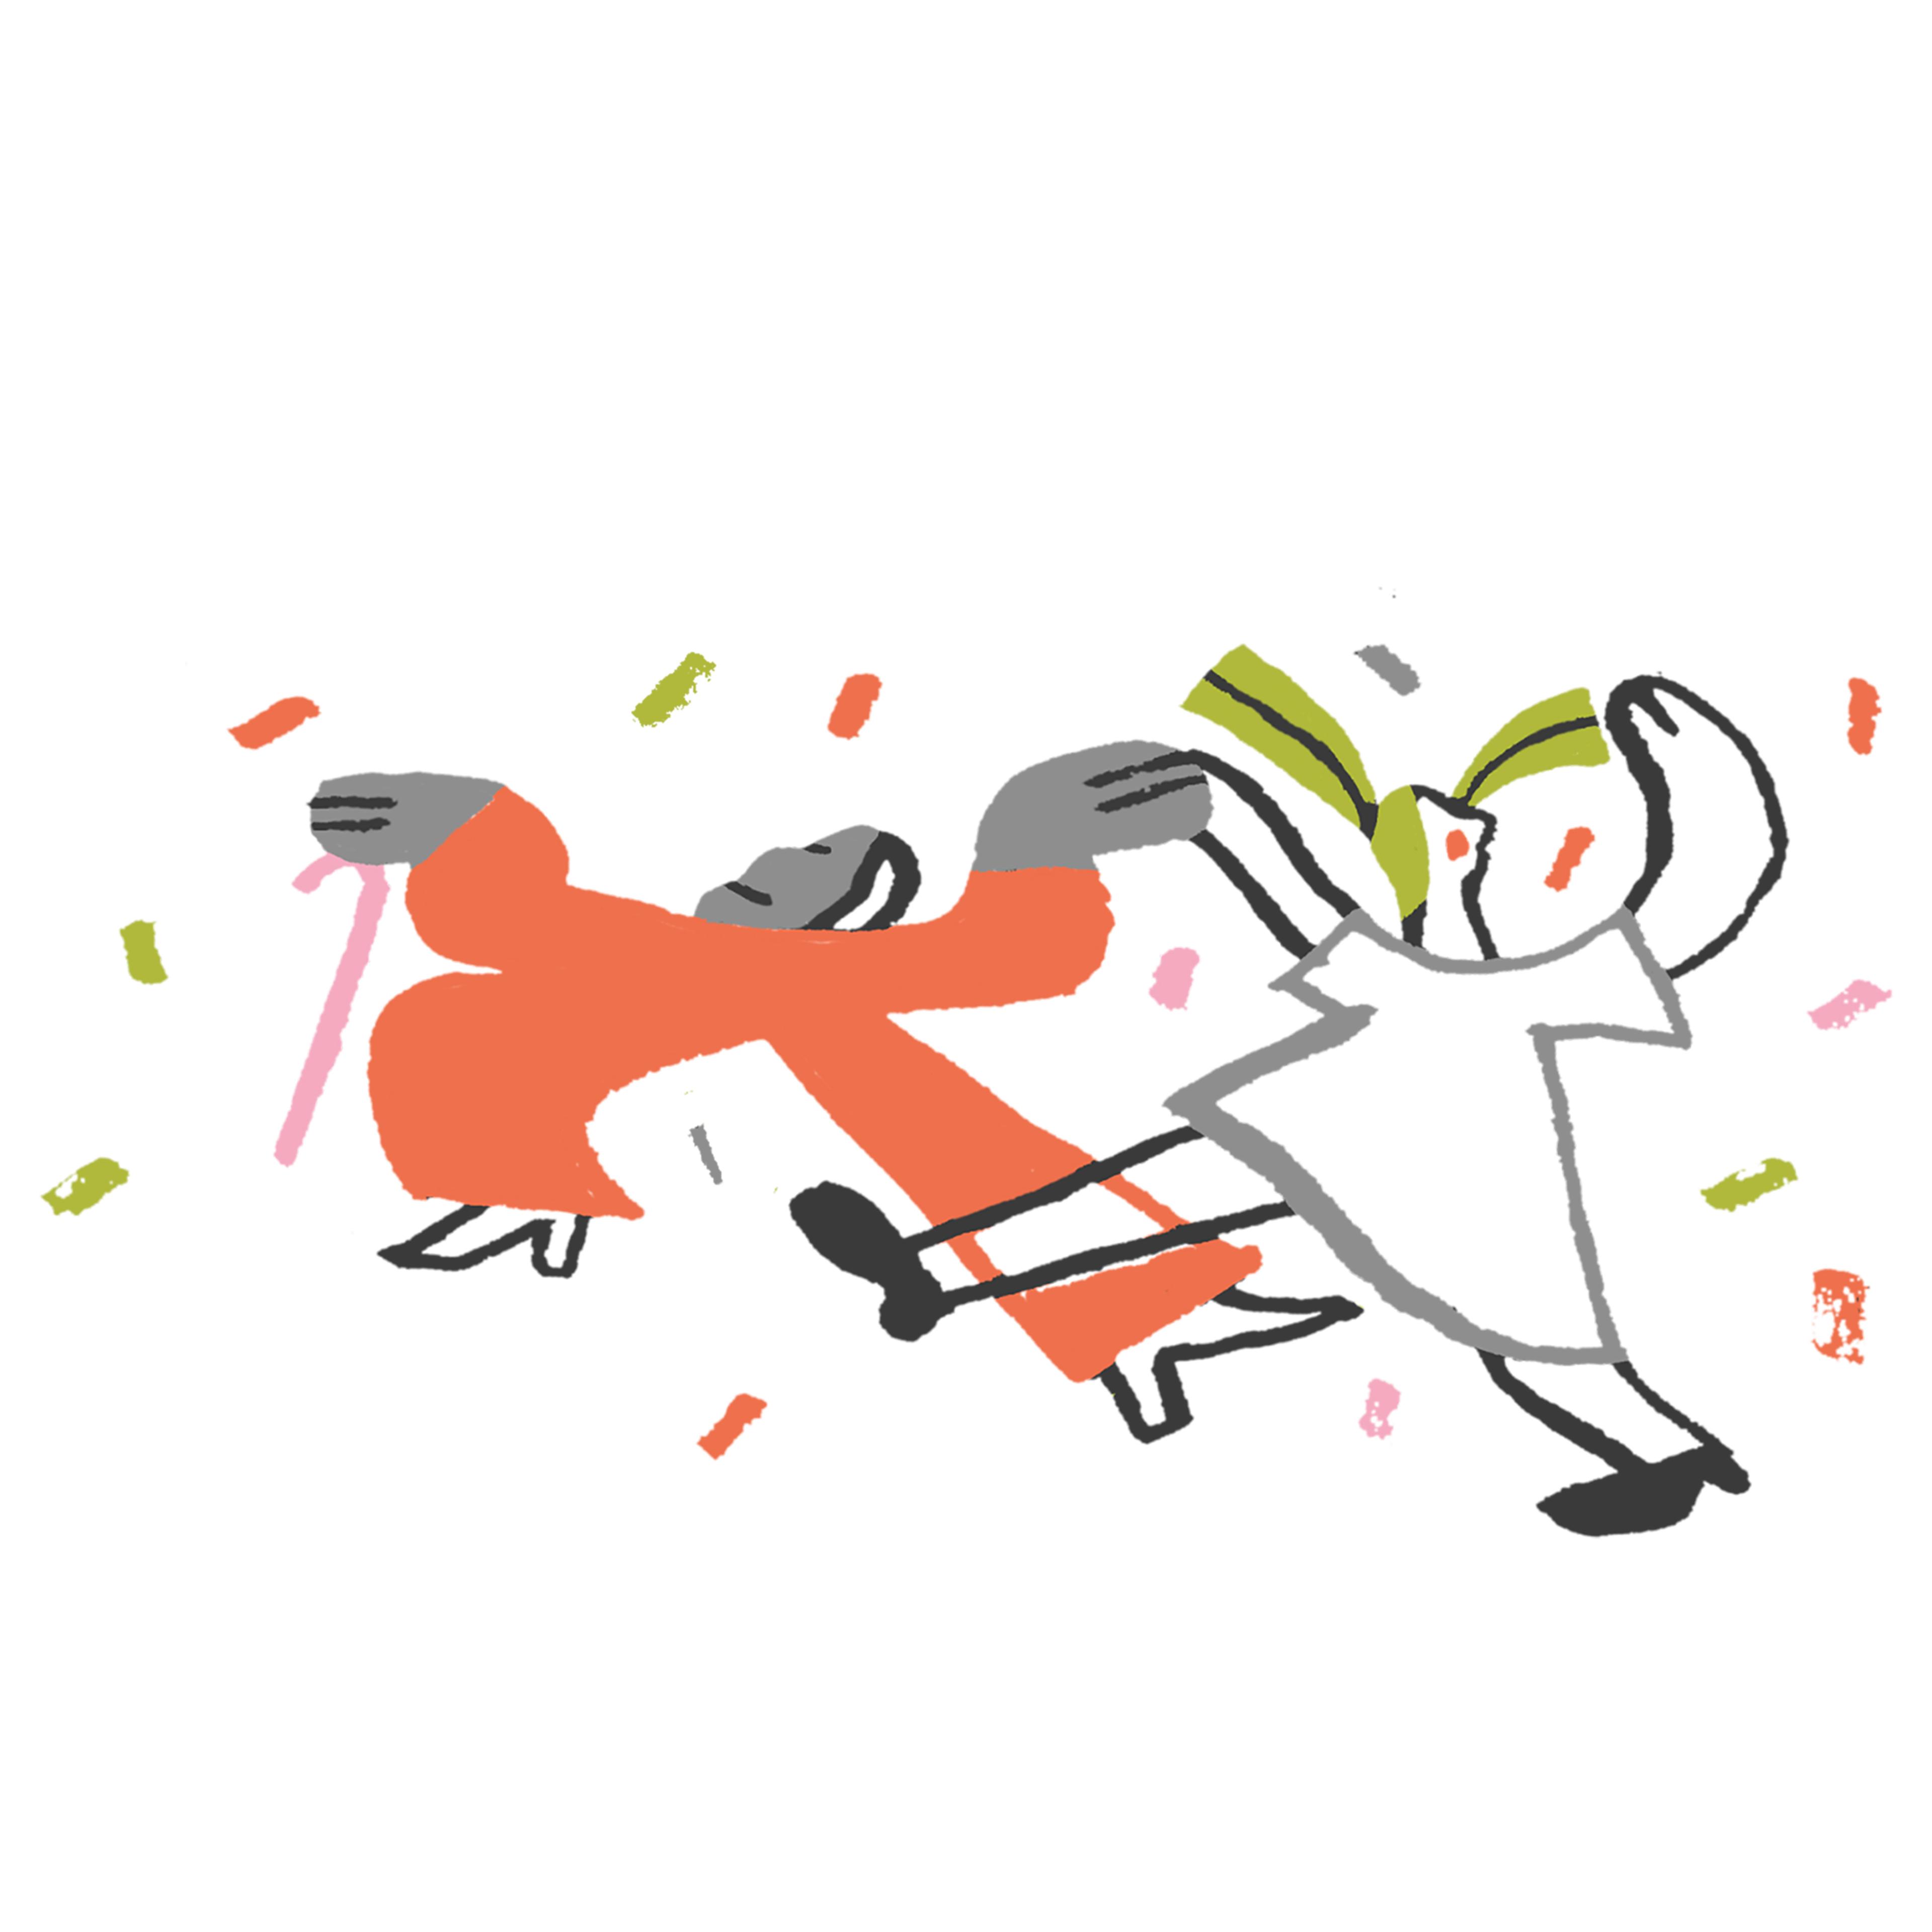 Illustration of two people dancing in a cloud of confetti. One of them is holding a stick.